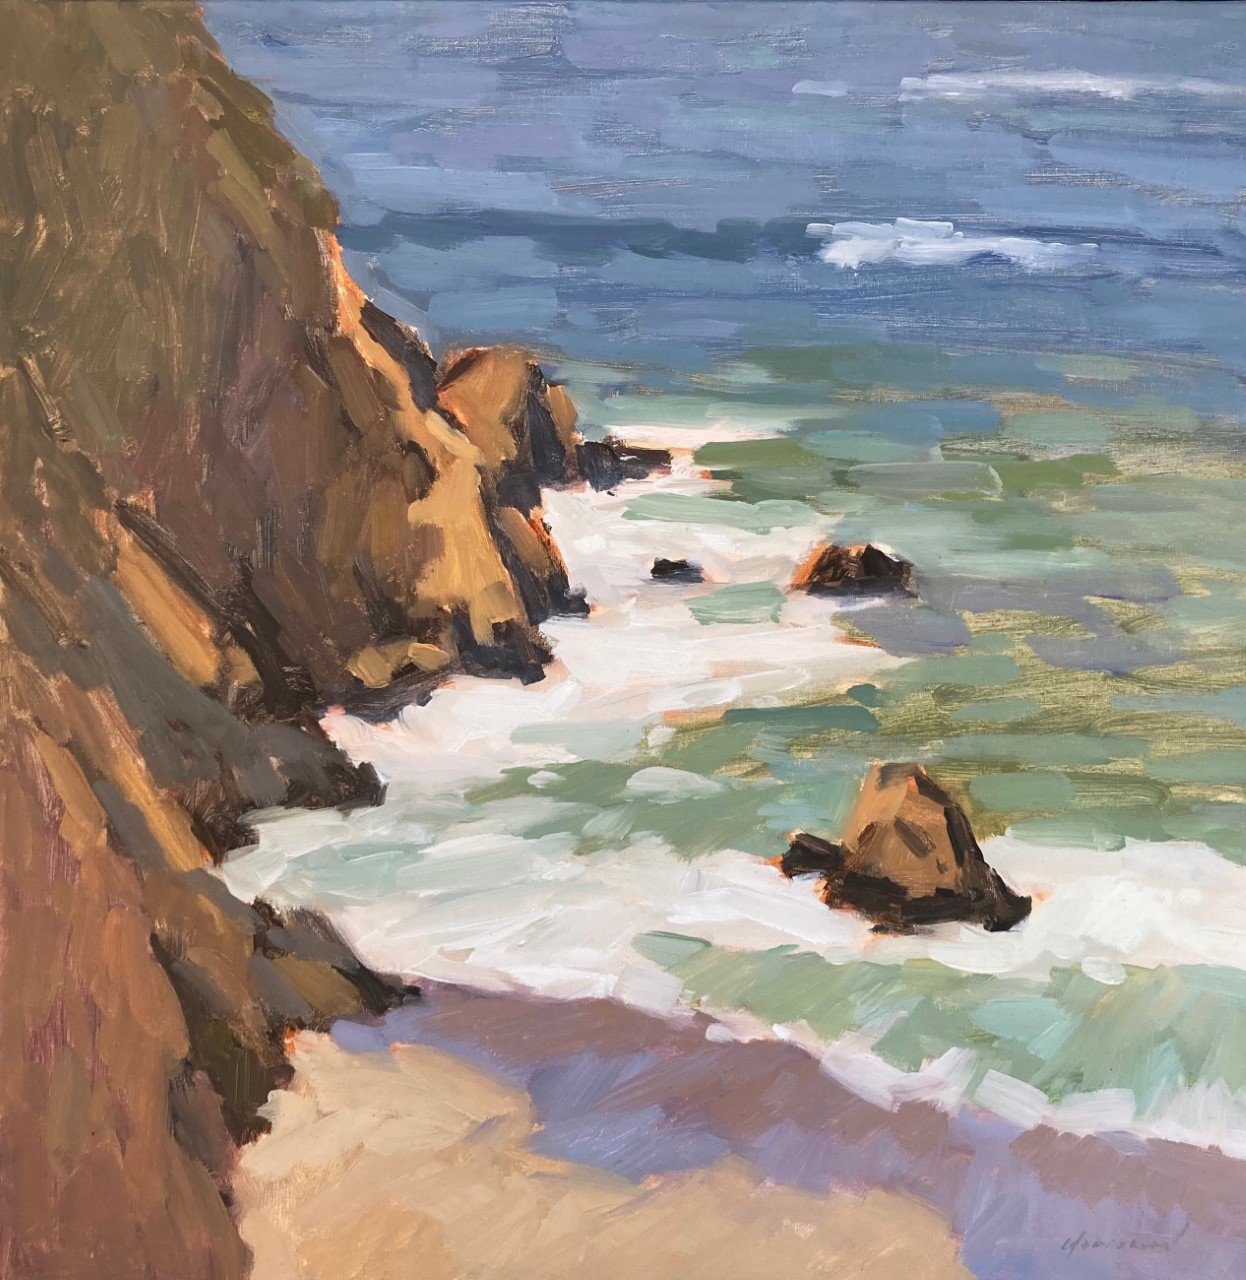 Gray Whale Cove by Michael Chamberlain